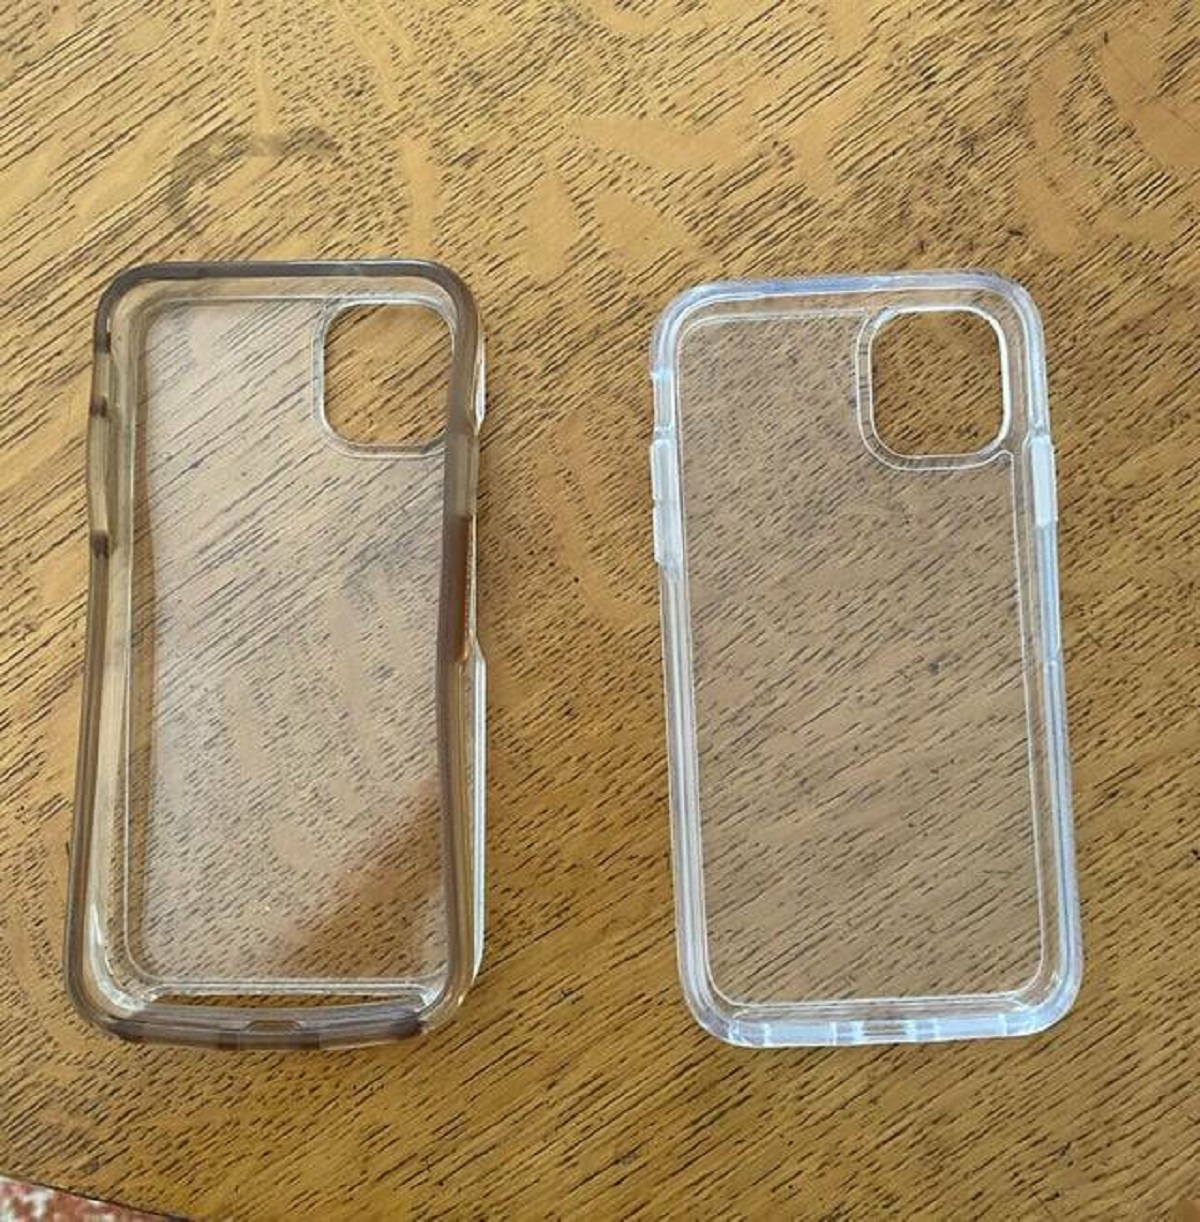 "The same phone case after 3 years of use vs brand new"